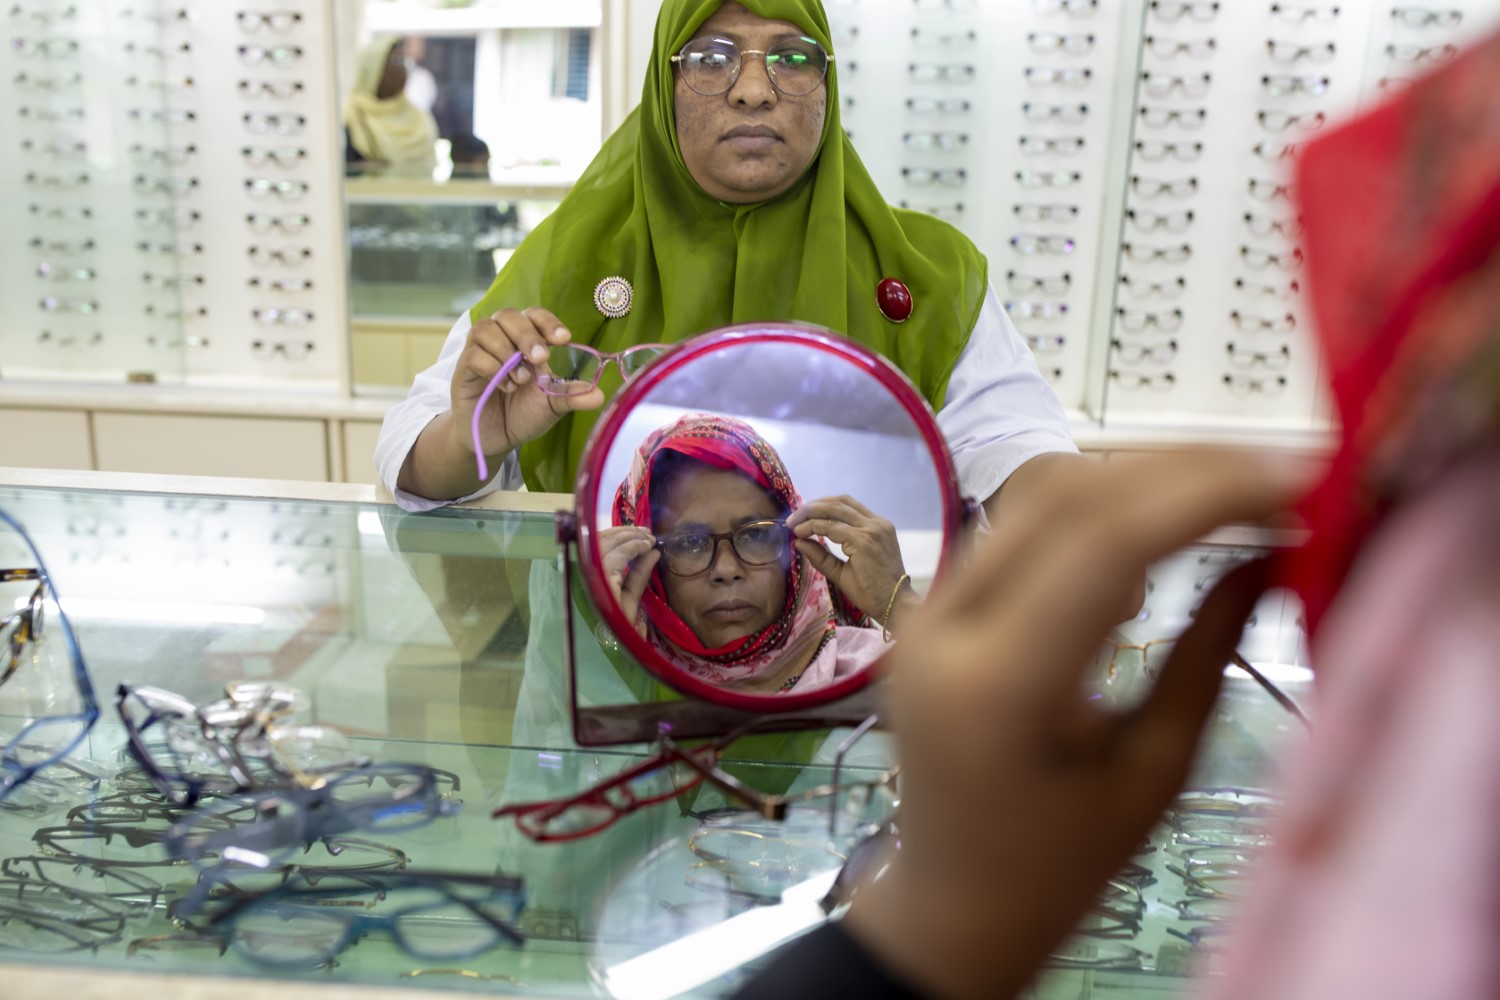 A woman in a green headscarf helps another woman, who is looking in a mirror, try on eyeglasses in an optometry store with multiple glasses on the counter and display shelves in the background.